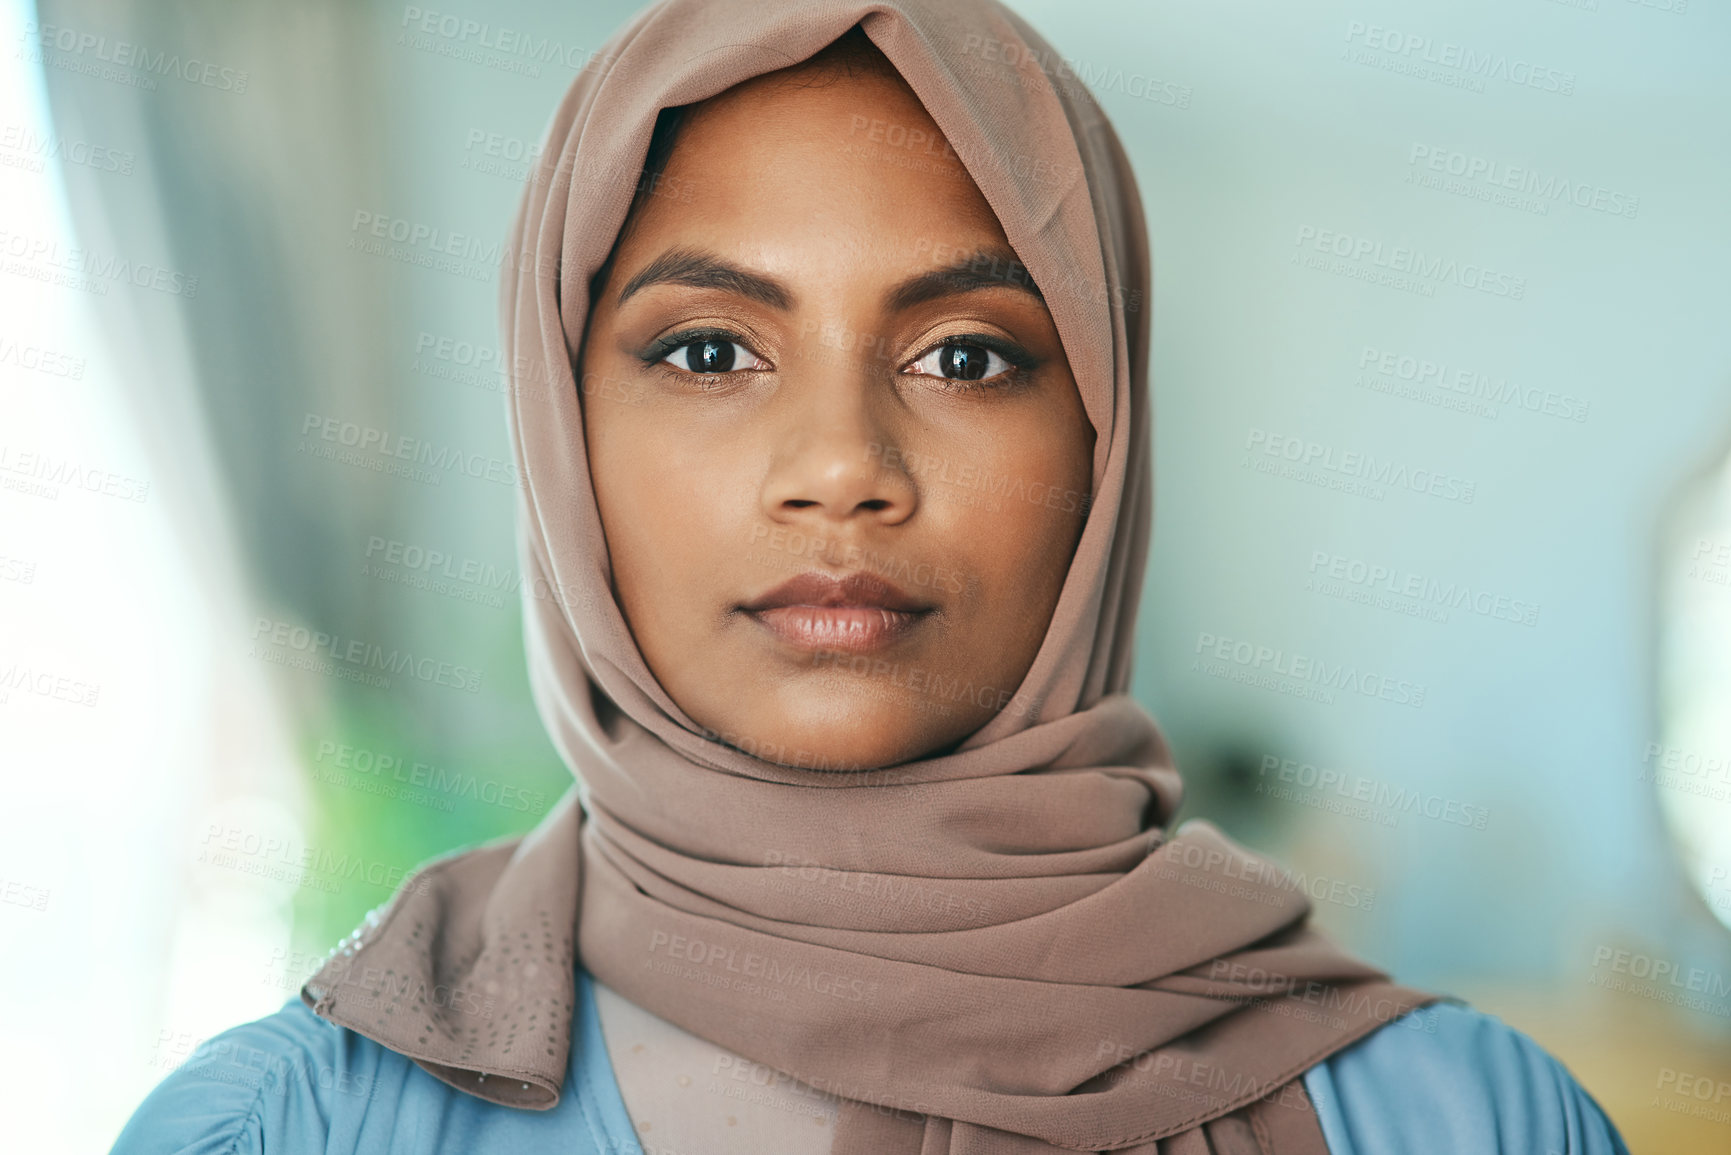 Buy stock photo Shot of a young muslim woman sitting in the loung at home